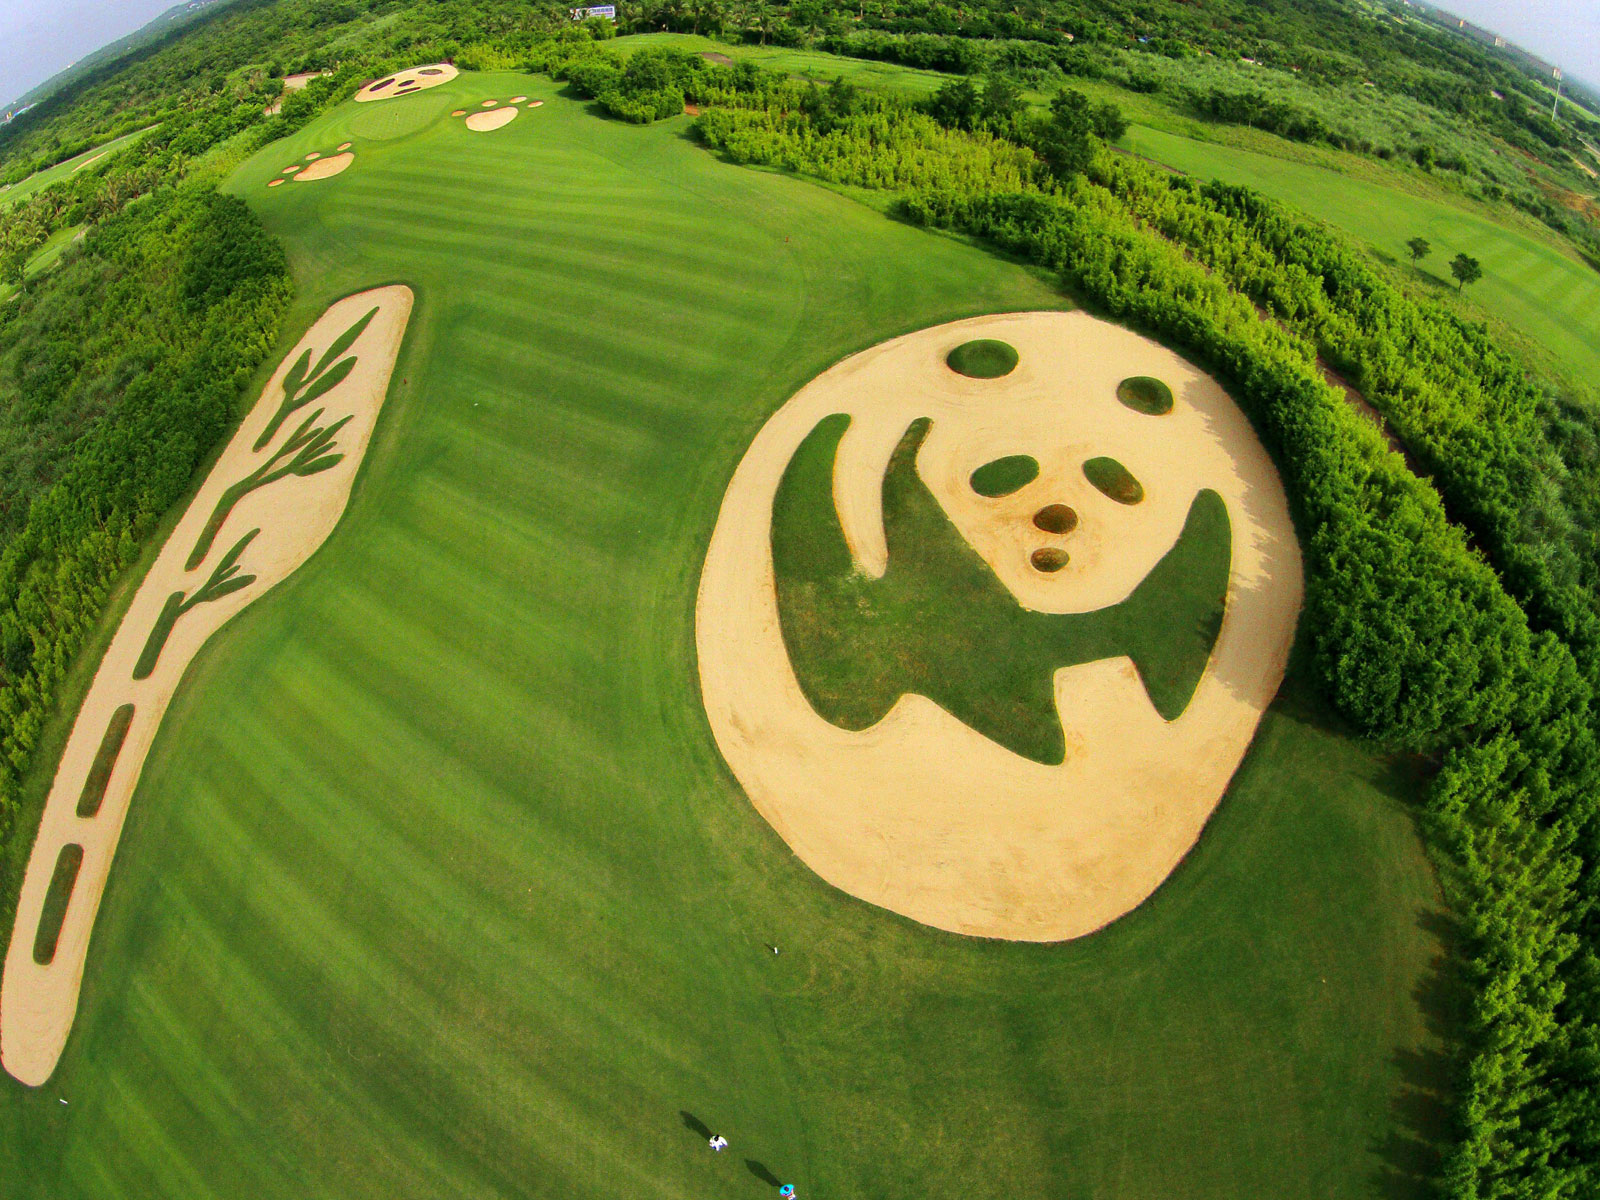 Mission Hills Course in China